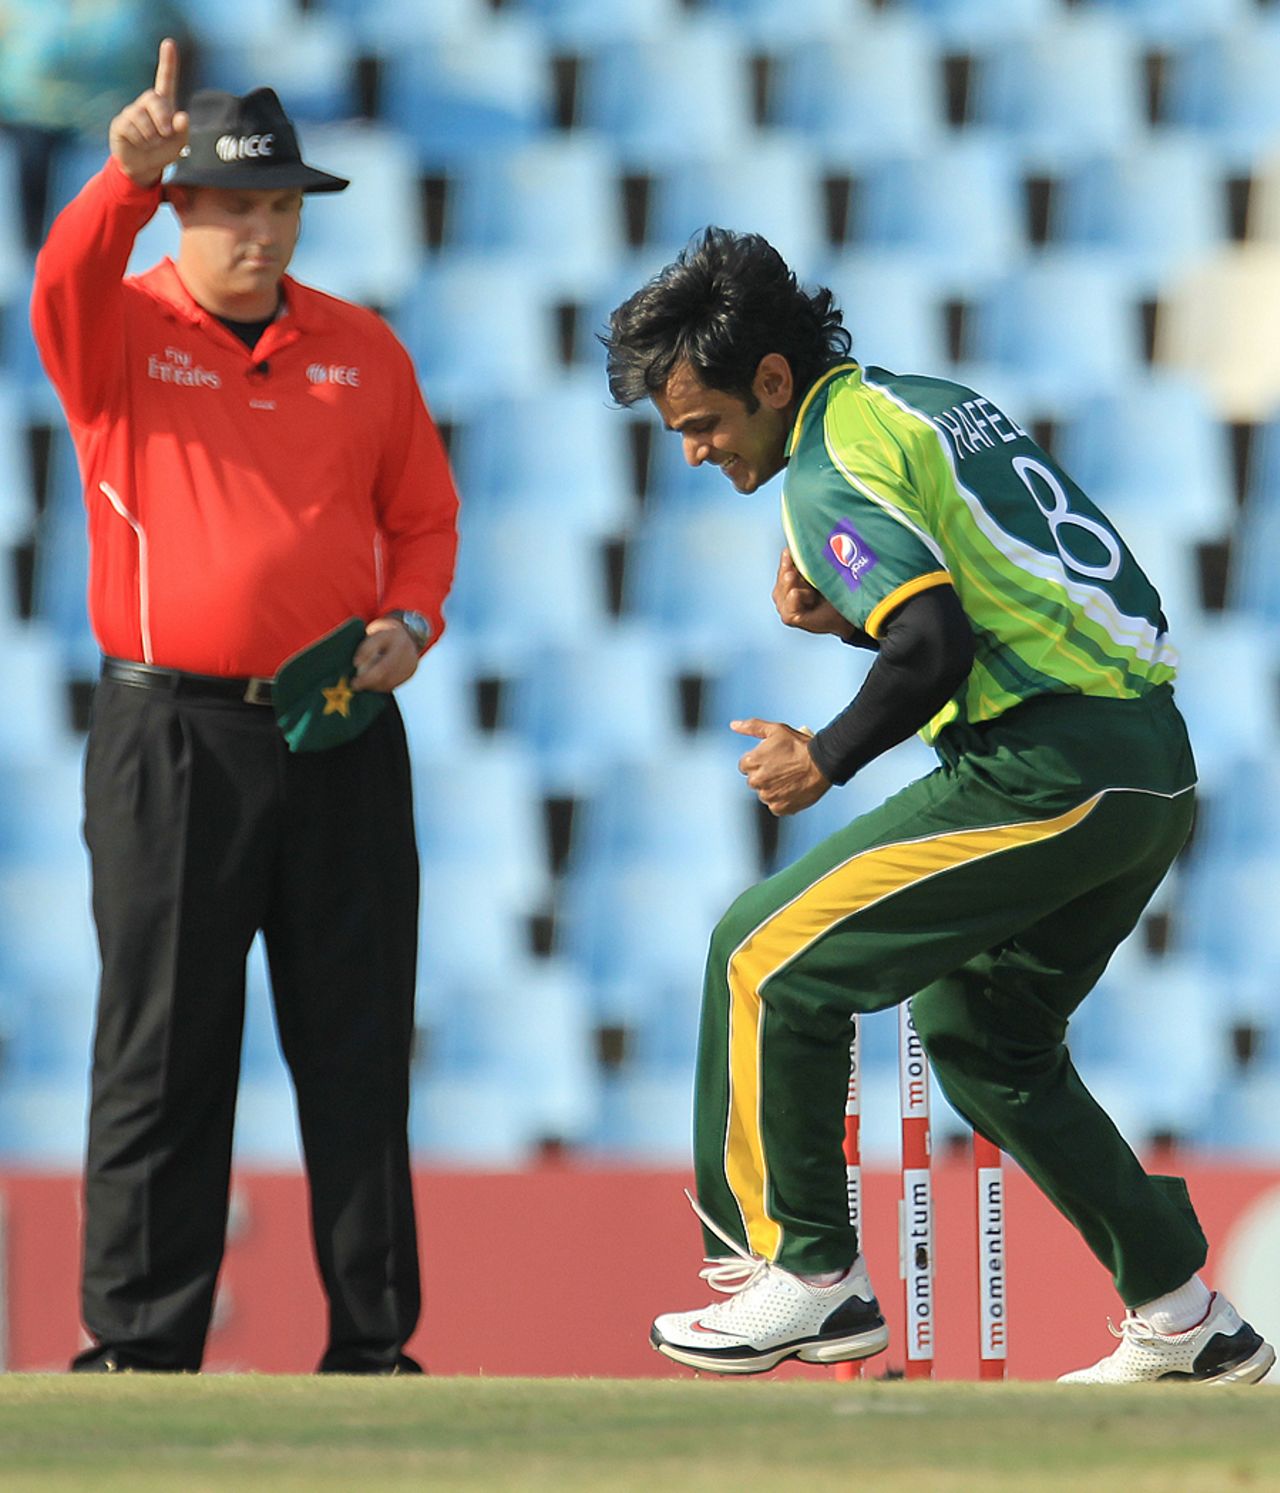 Mohammad Hafeez celebrates after getting the umpire's verdict, South Africa v Pakistan, 2nd ODI, Centurion, March 15, 2013